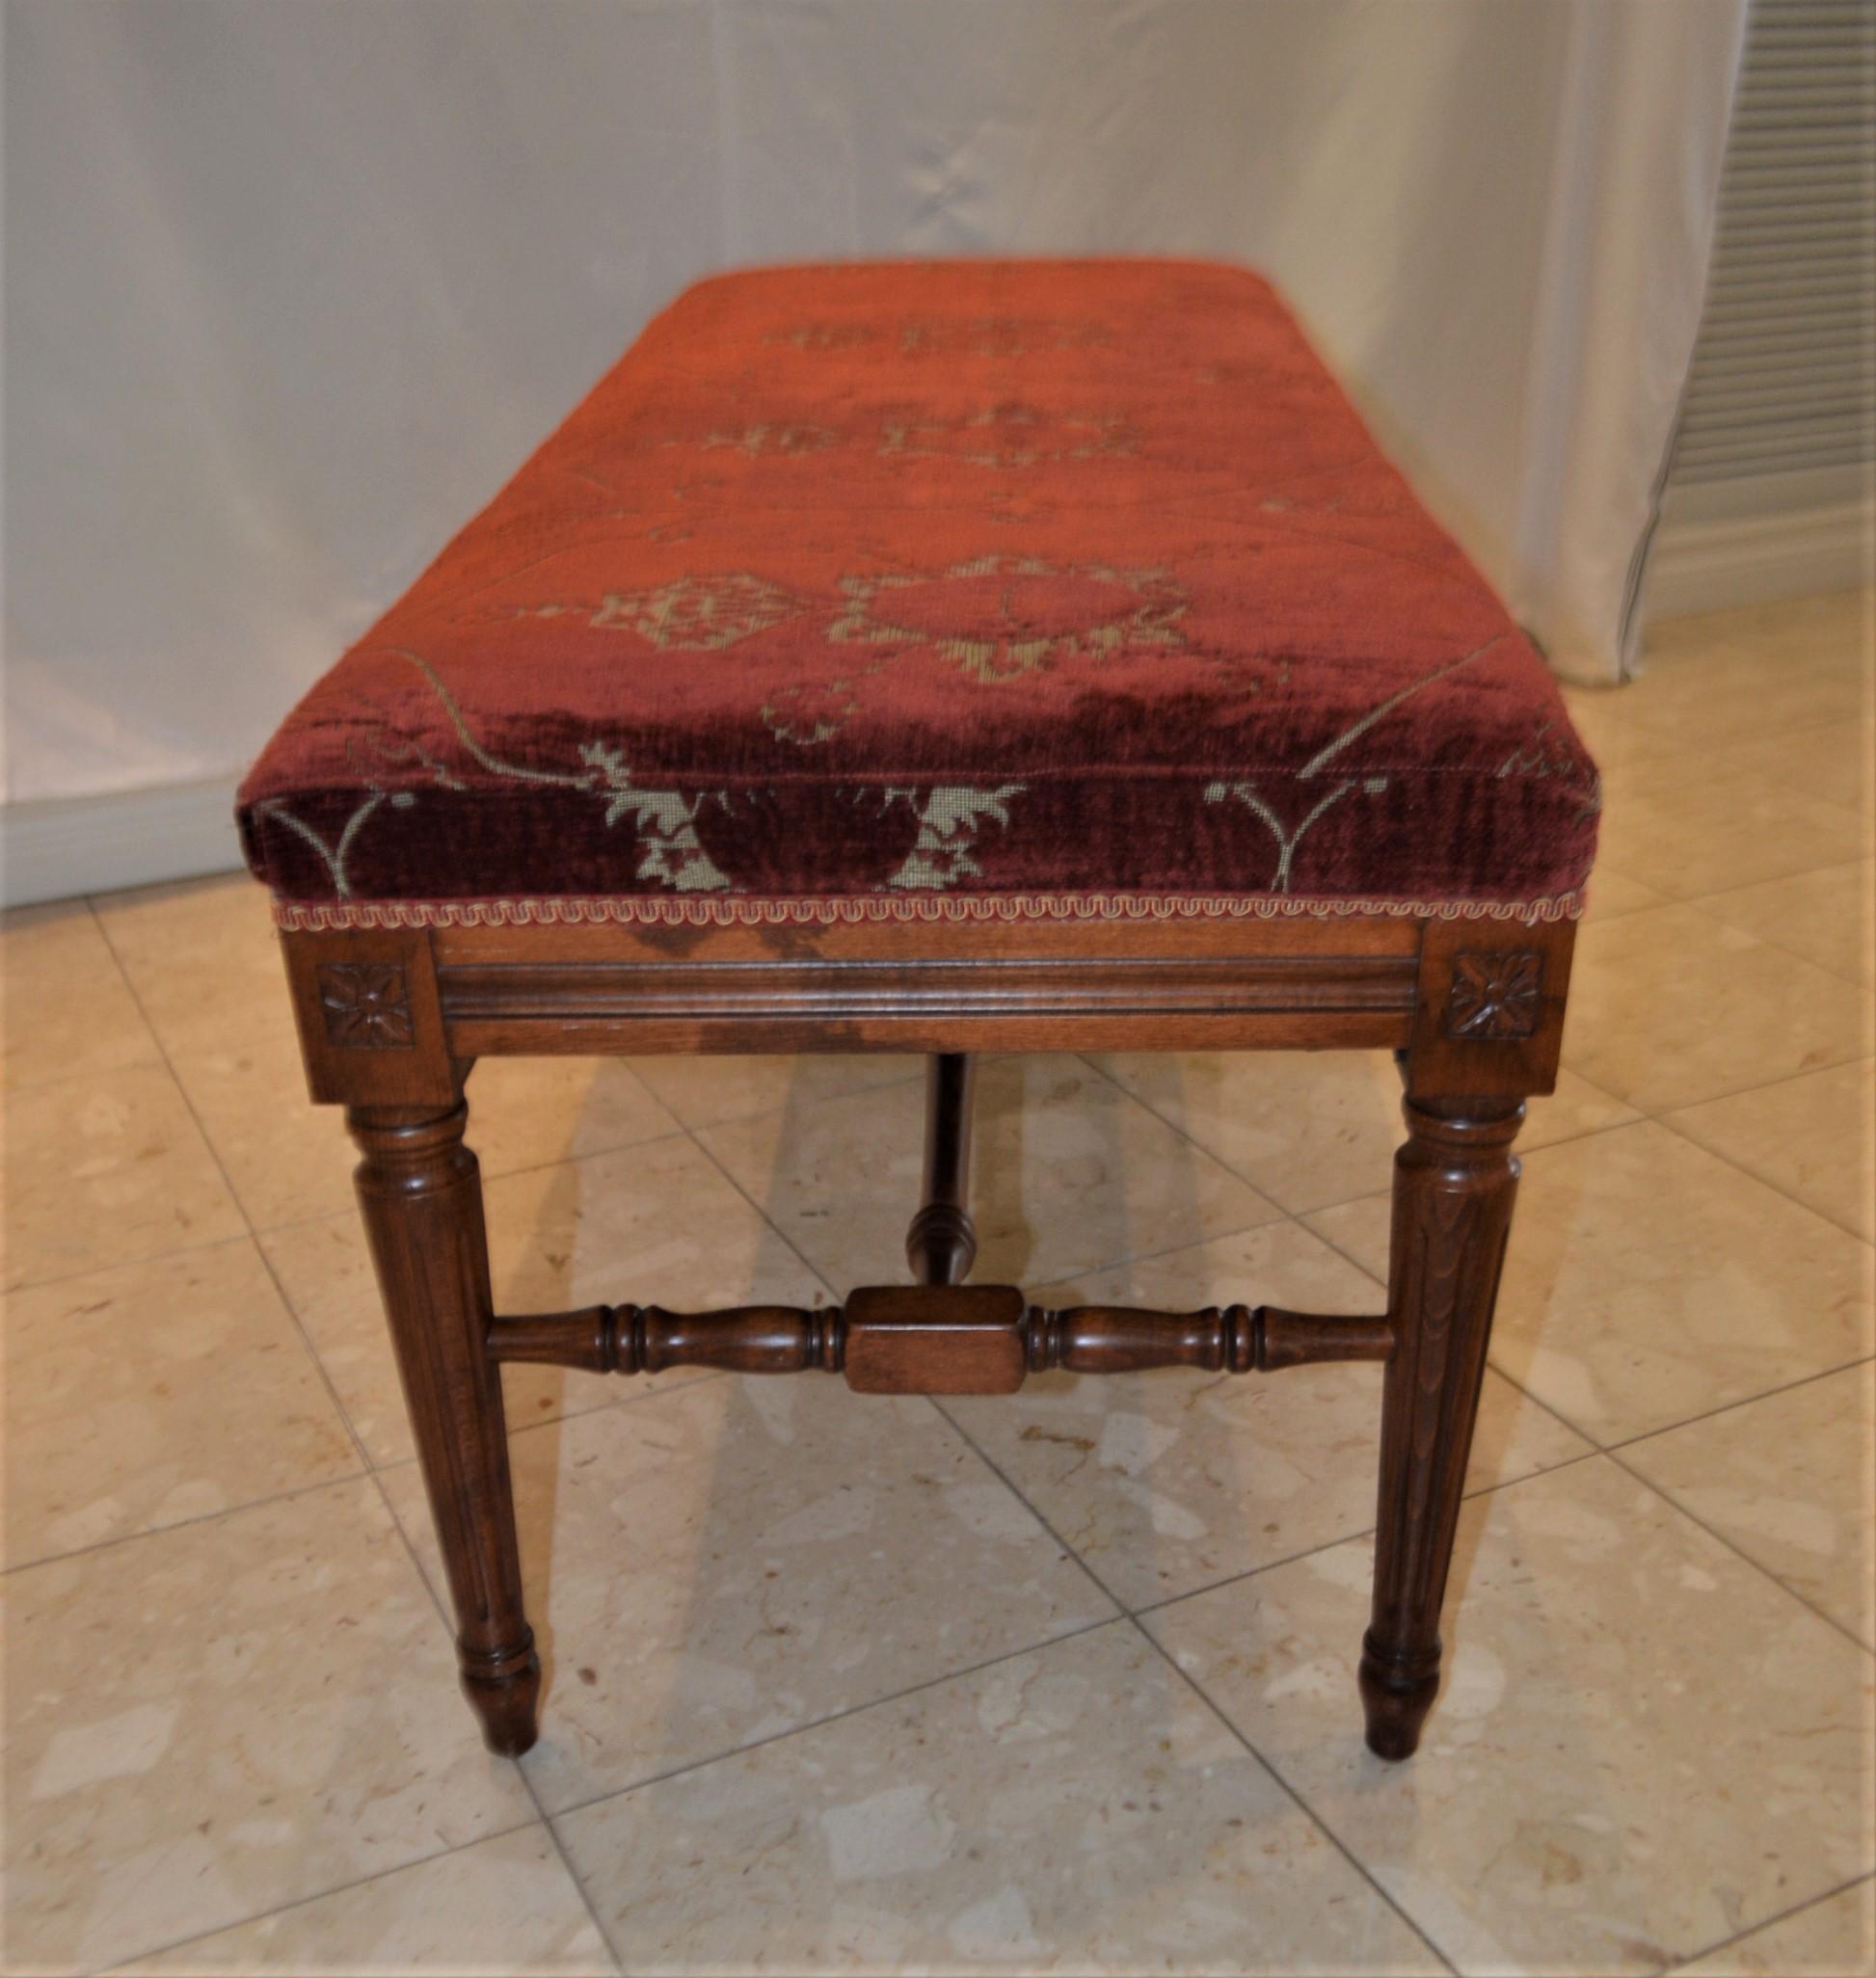 Stained Louis XVI style bench upholstered with a red antique chenille fabric.